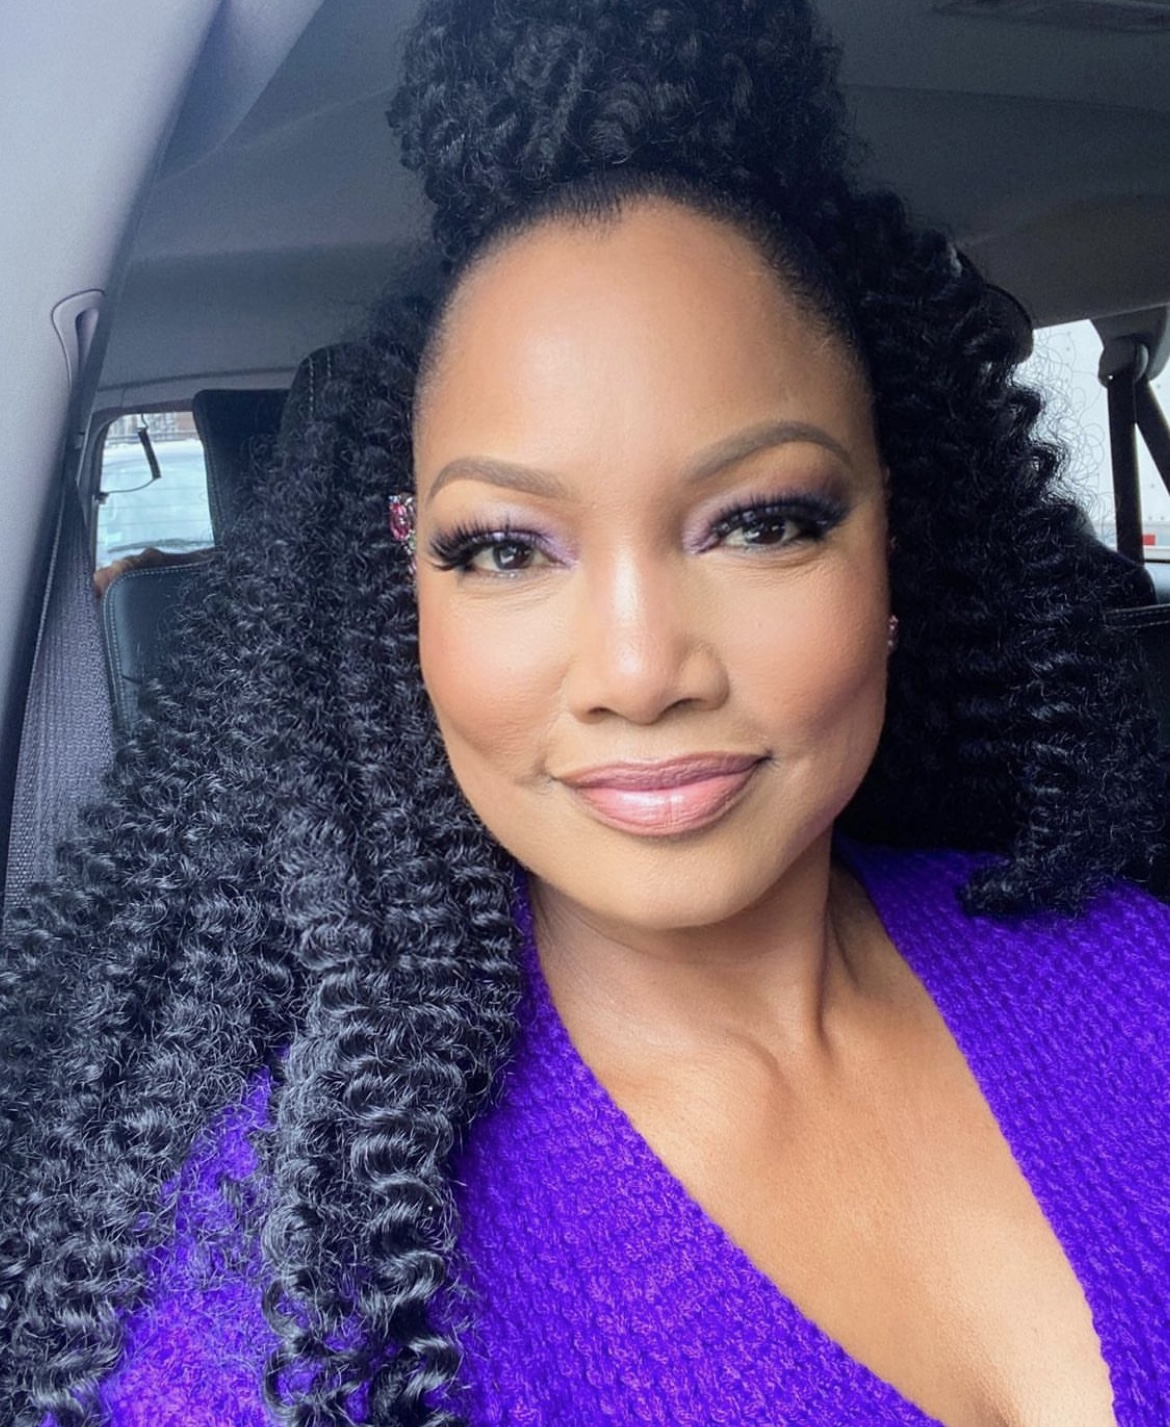 Garcelle Beauvais Sued For Posting Paparazzi Images Of Herself Online, Photographer Claims Shes In Violation Of The US Copyright Laws [Video]